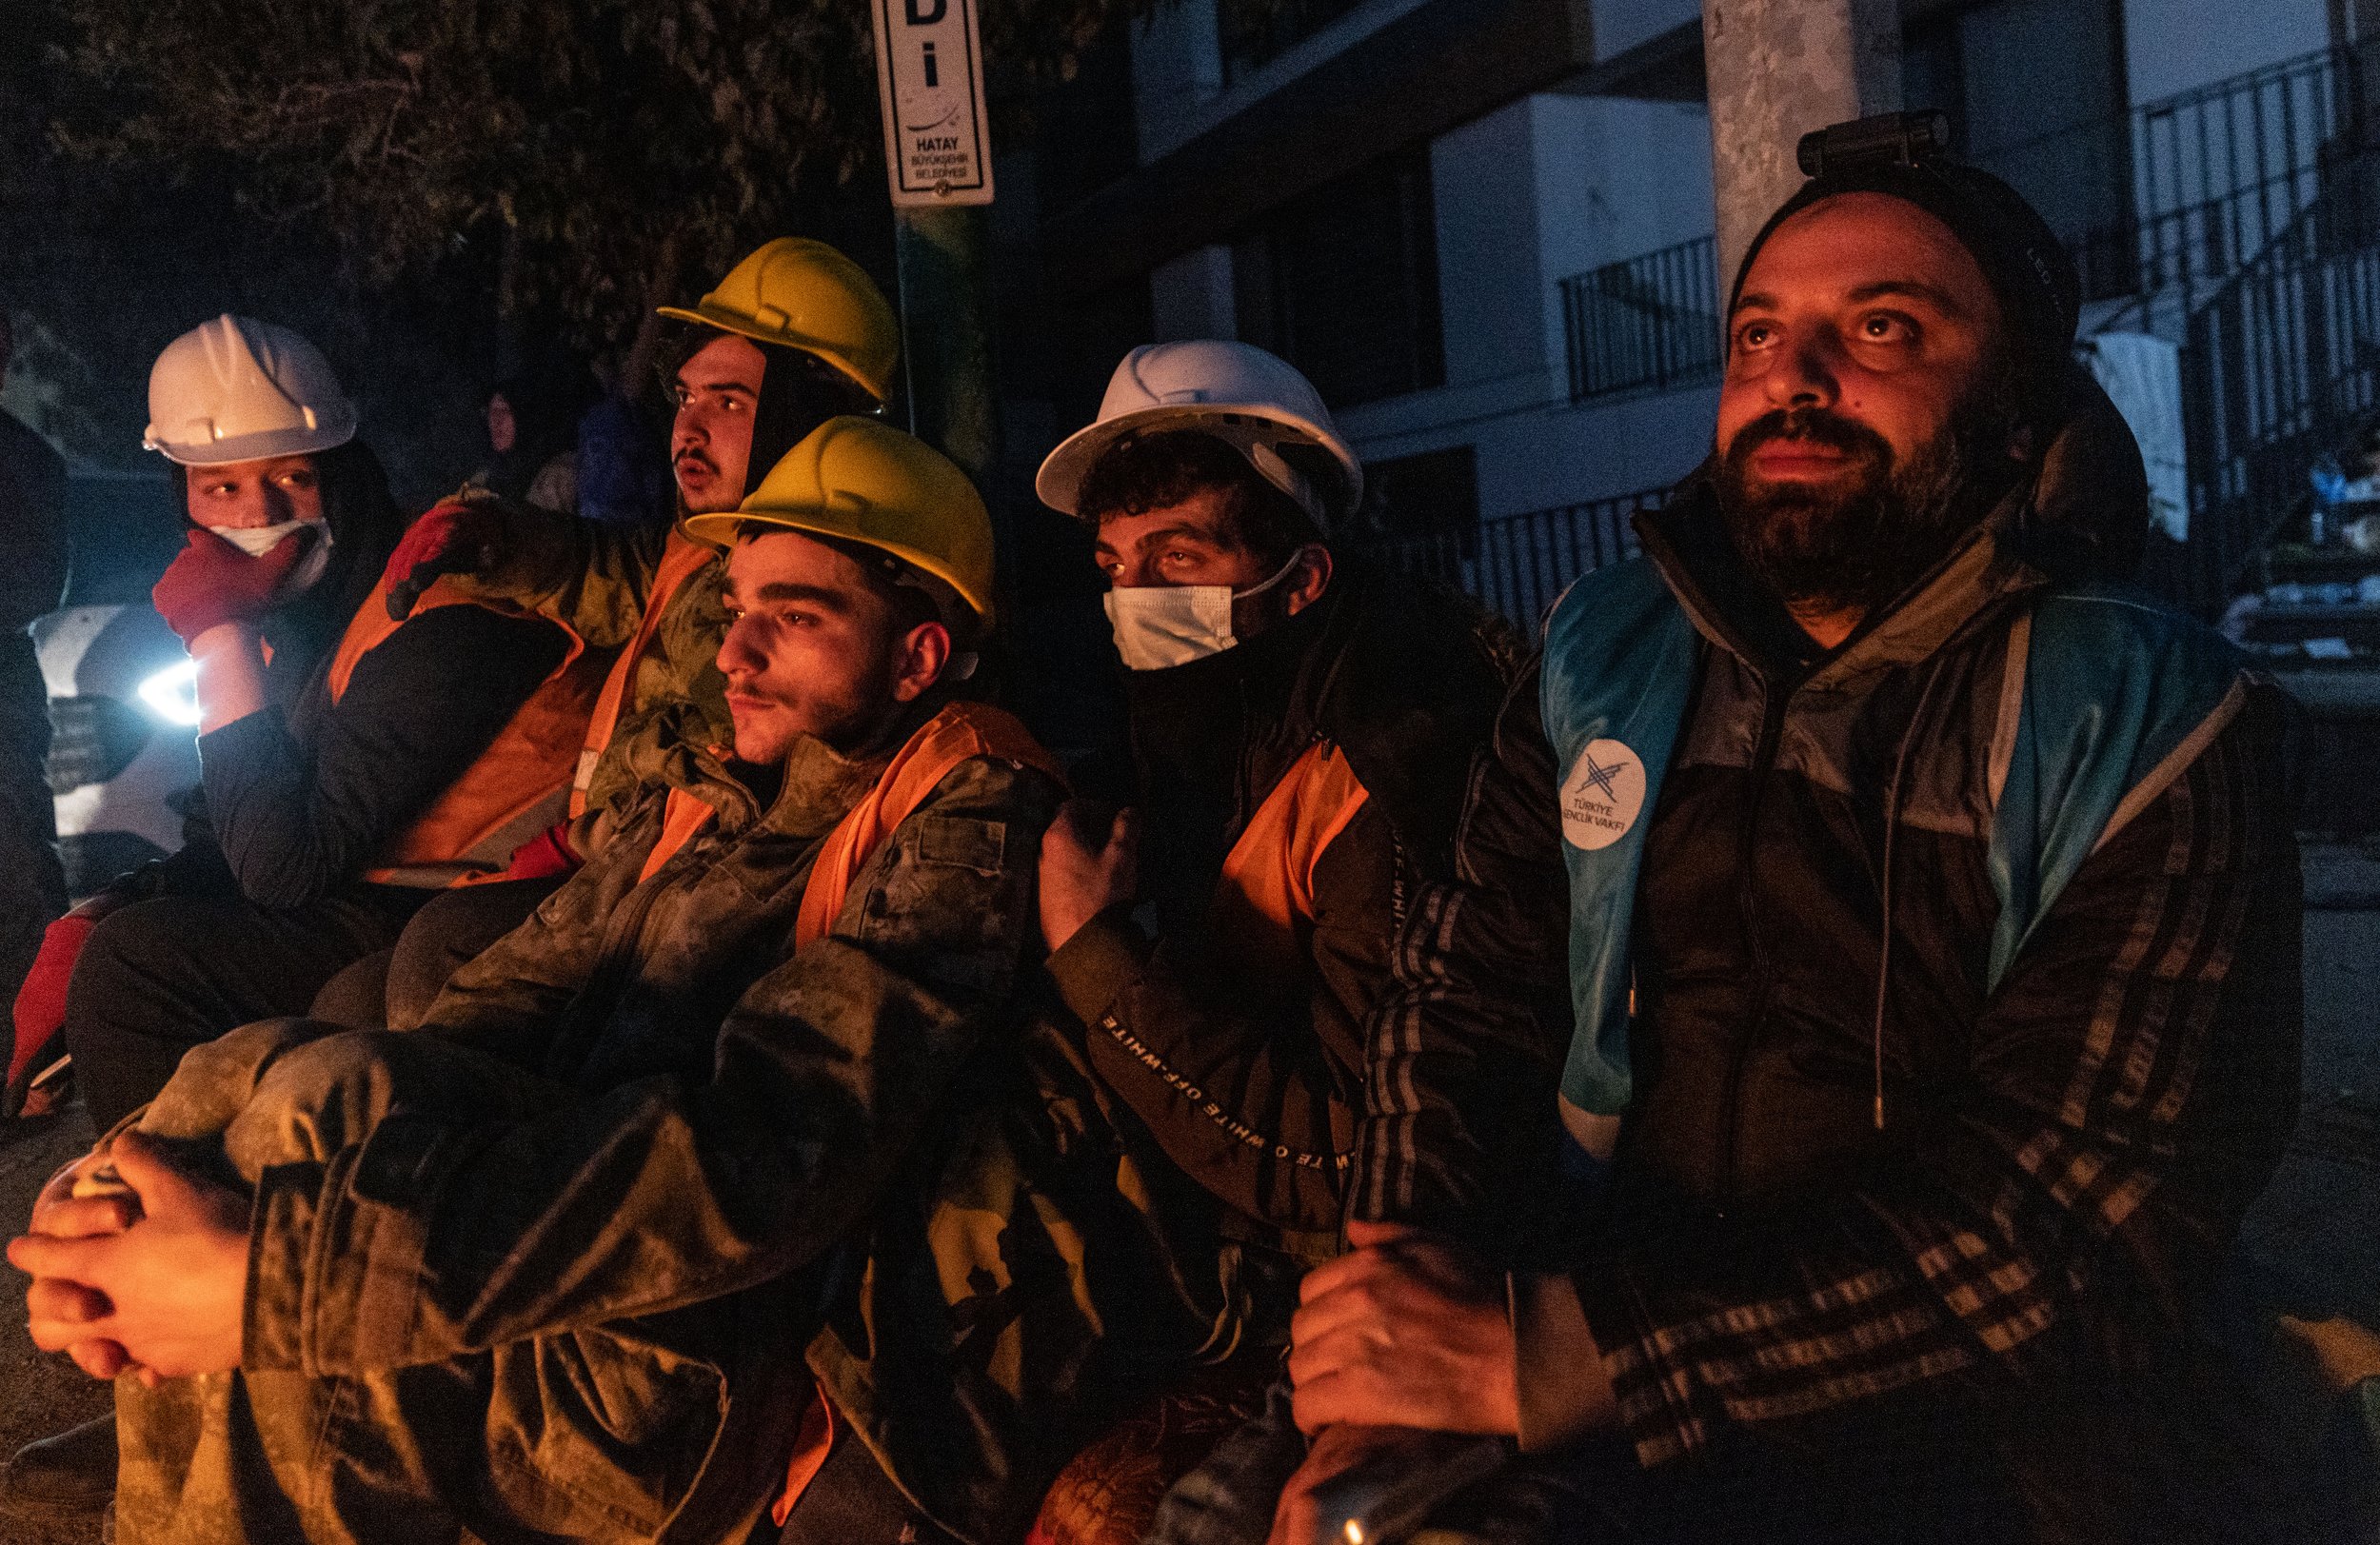  Volunteer rescue workers tear up by a fire in Haty, Turkey on February 13, 2023, after a failed thirty-hour rescue of a child beneath a collapsed building. 